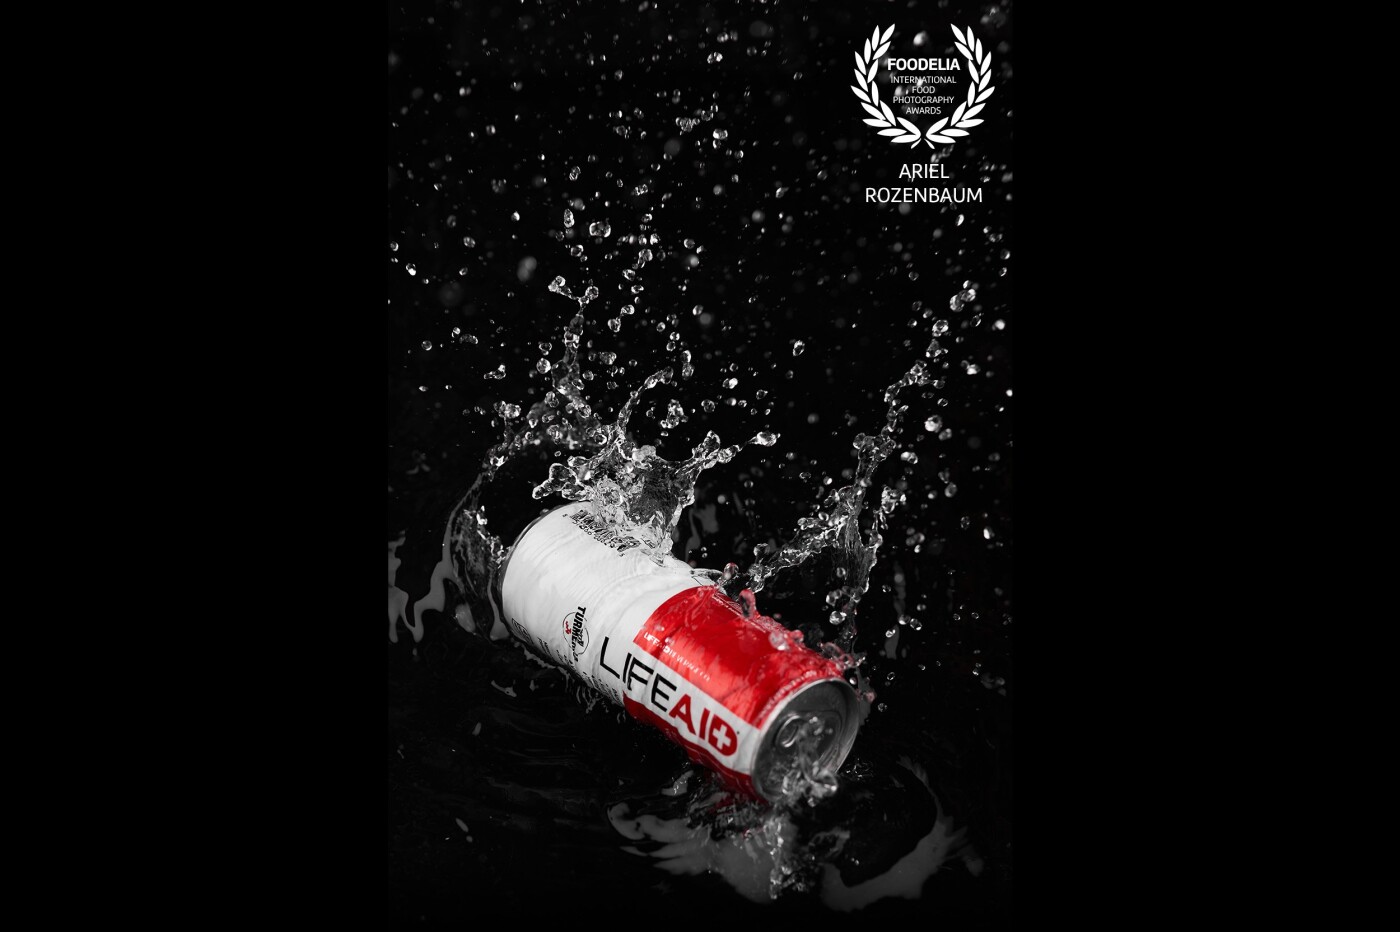 This was a spec shoot for LifeAid, throwing cans into a shallow black tub with water. Their marketing was mostly bright and white and I wanted to see about providing a different look that was still desireable and refreshing.